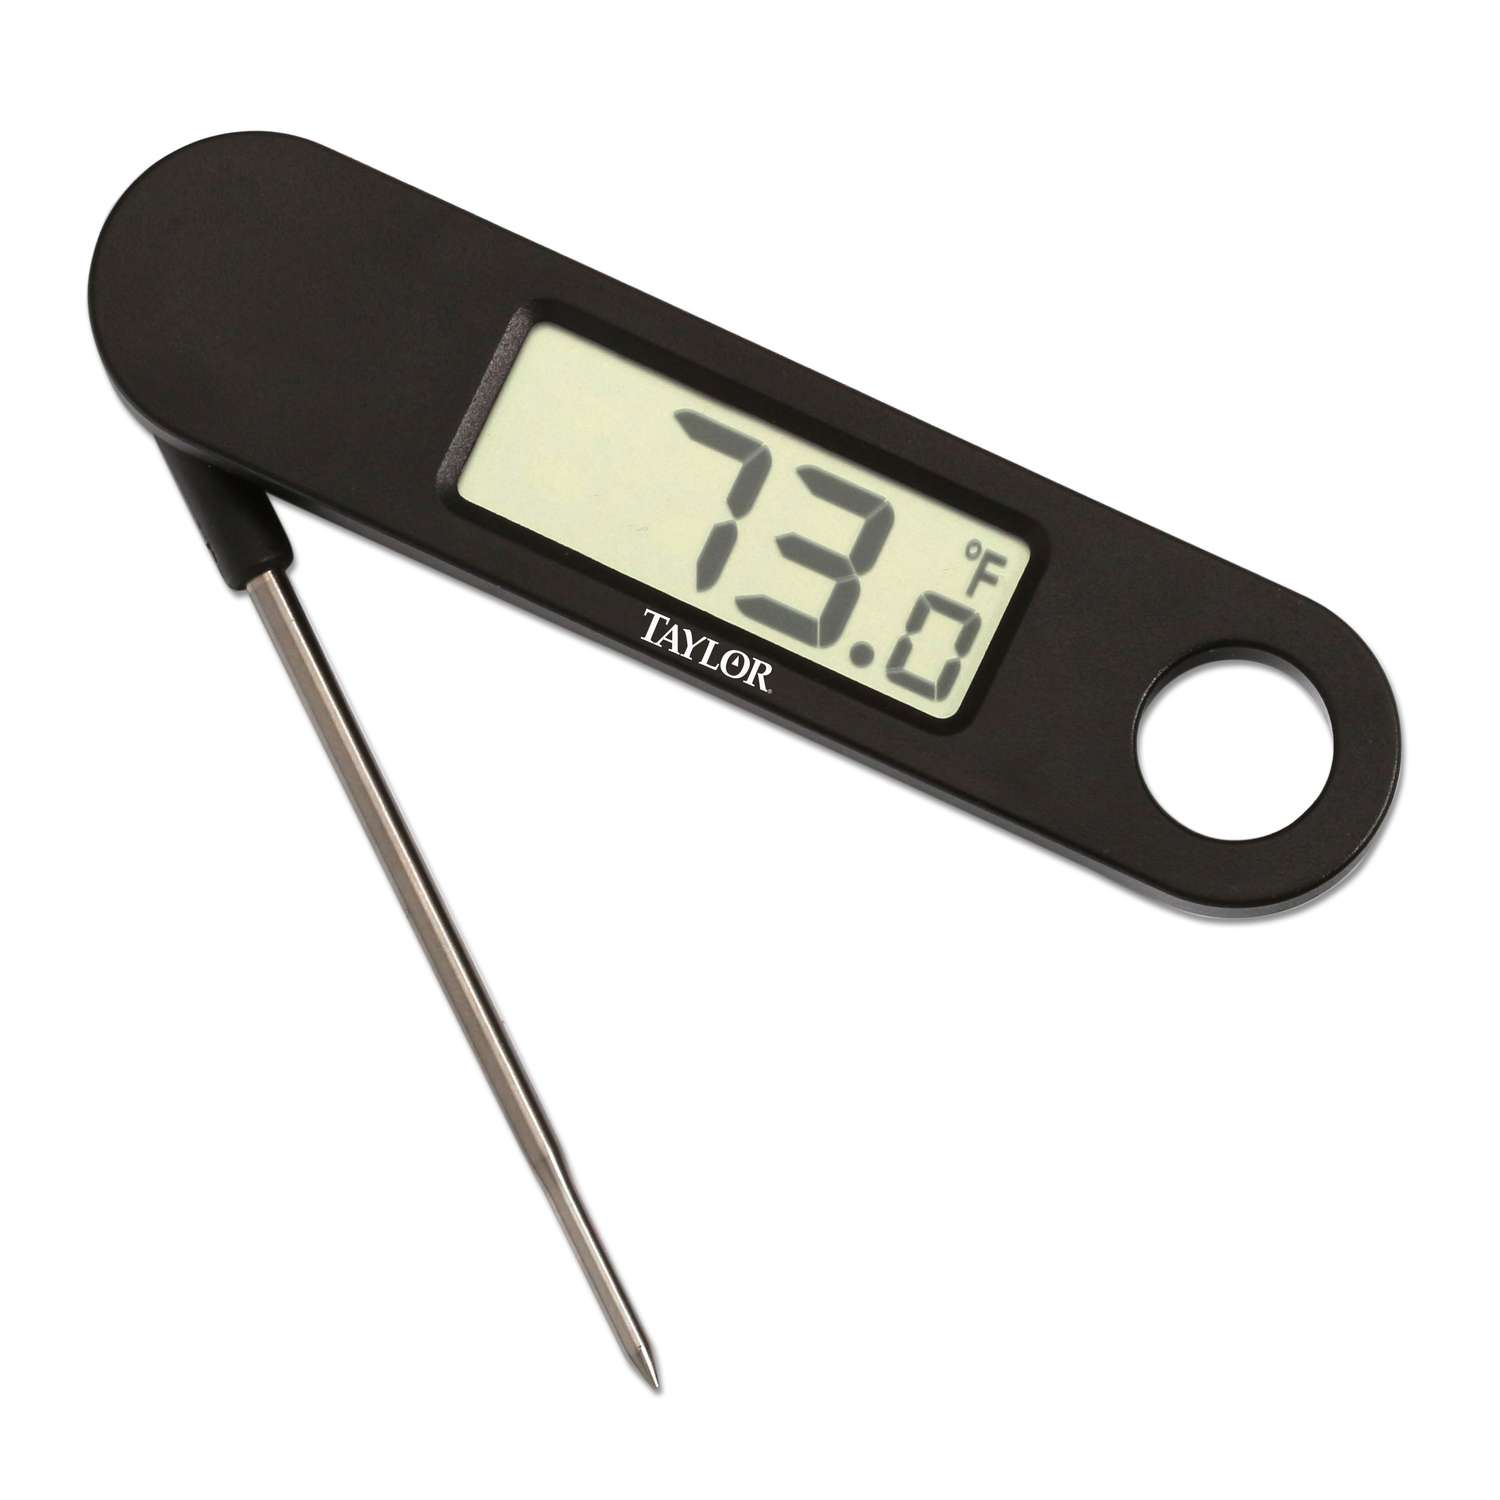 Brushed Stainless Steel Digital Refrigerator and Freezer Thermometer